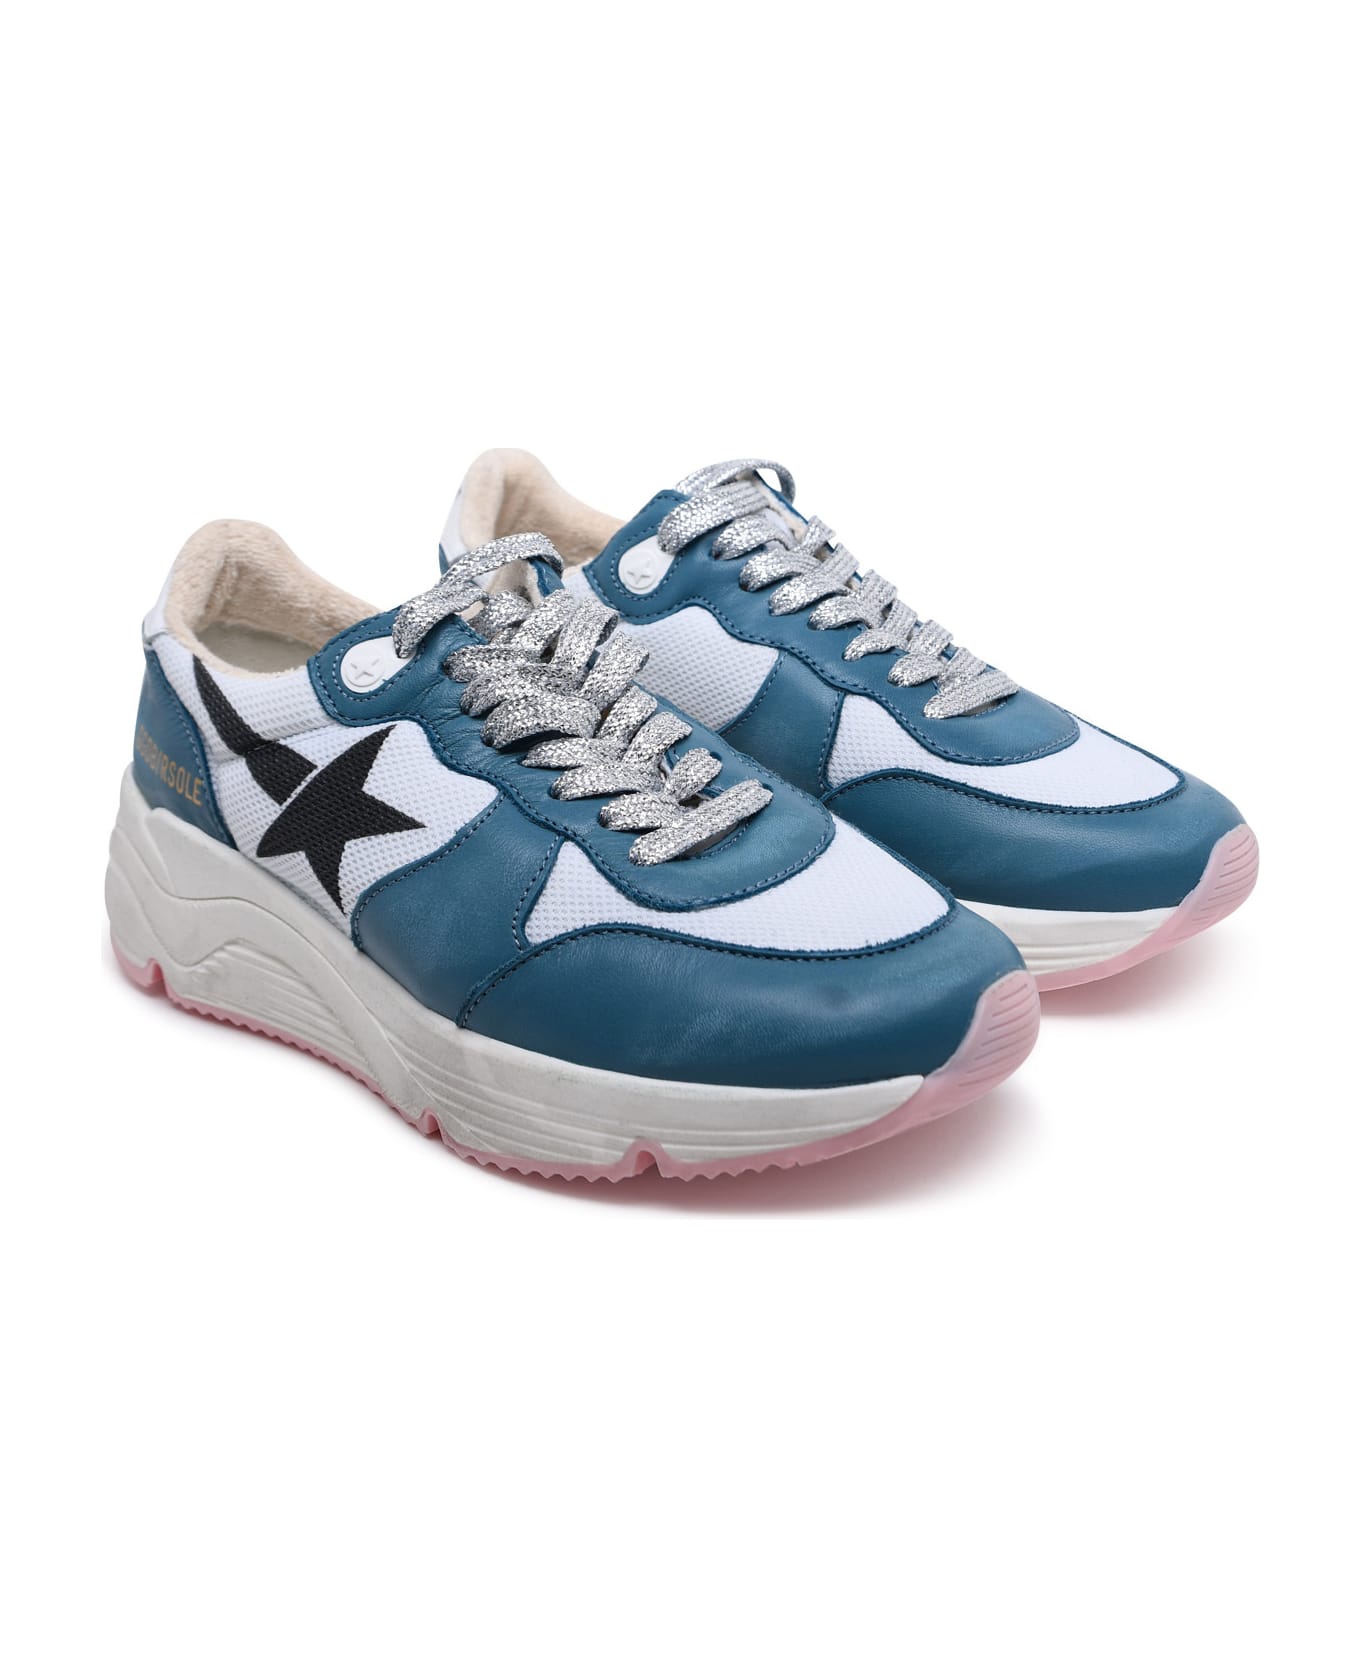 Golden Goose Running Sole Two-color Leather Blend Sneakers - turquoise